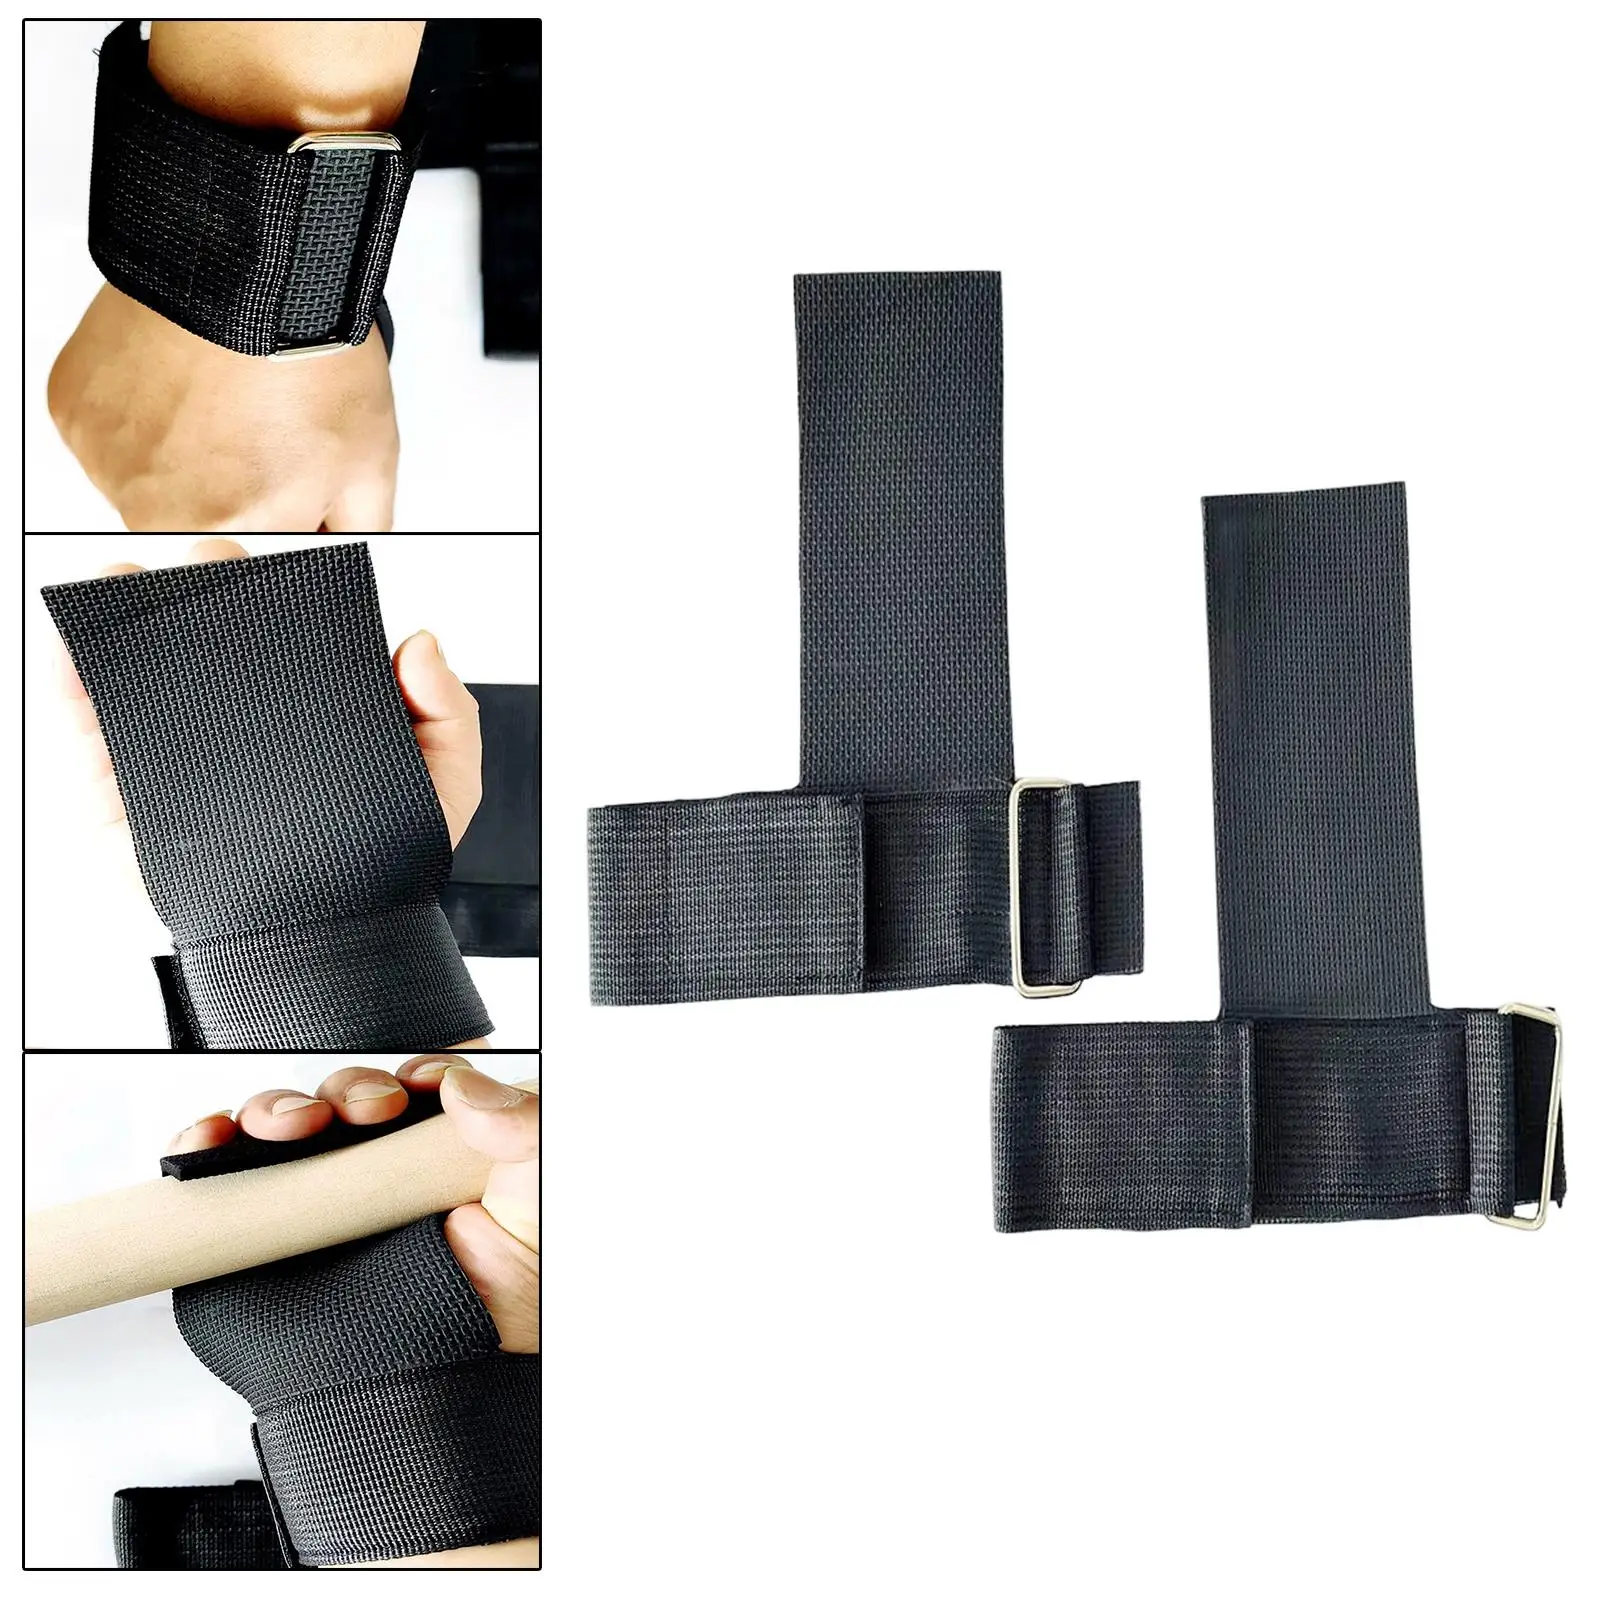 2x Weight Lifting Straps Wrist Support Non Slip Wear Resistant Gloves Bar Deadlift Weightlifting Powerlifting Gym